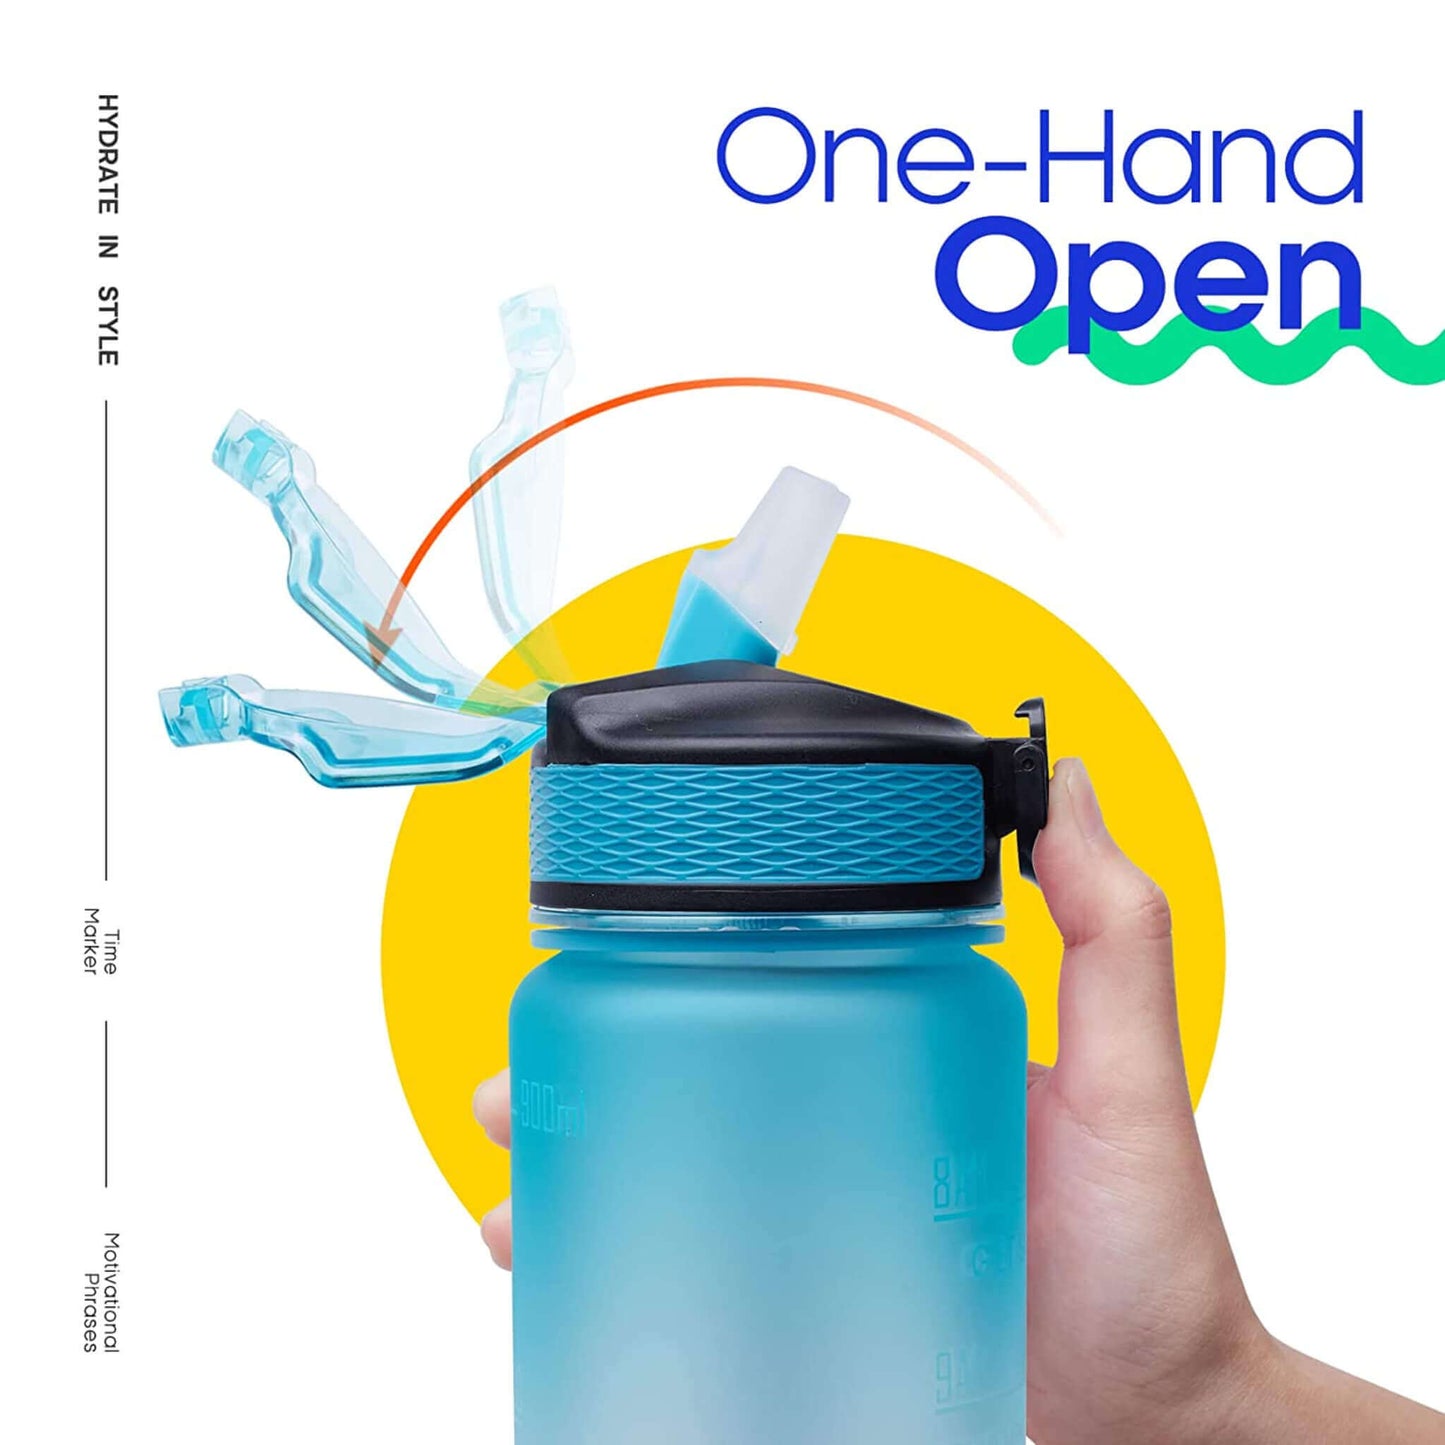 Drinking Water Bottle with Motivational Time Marker, Sipper Straw Drinking Reminder, For Gym, Kids, Home, Office, School (1000ML, Assorted Color)